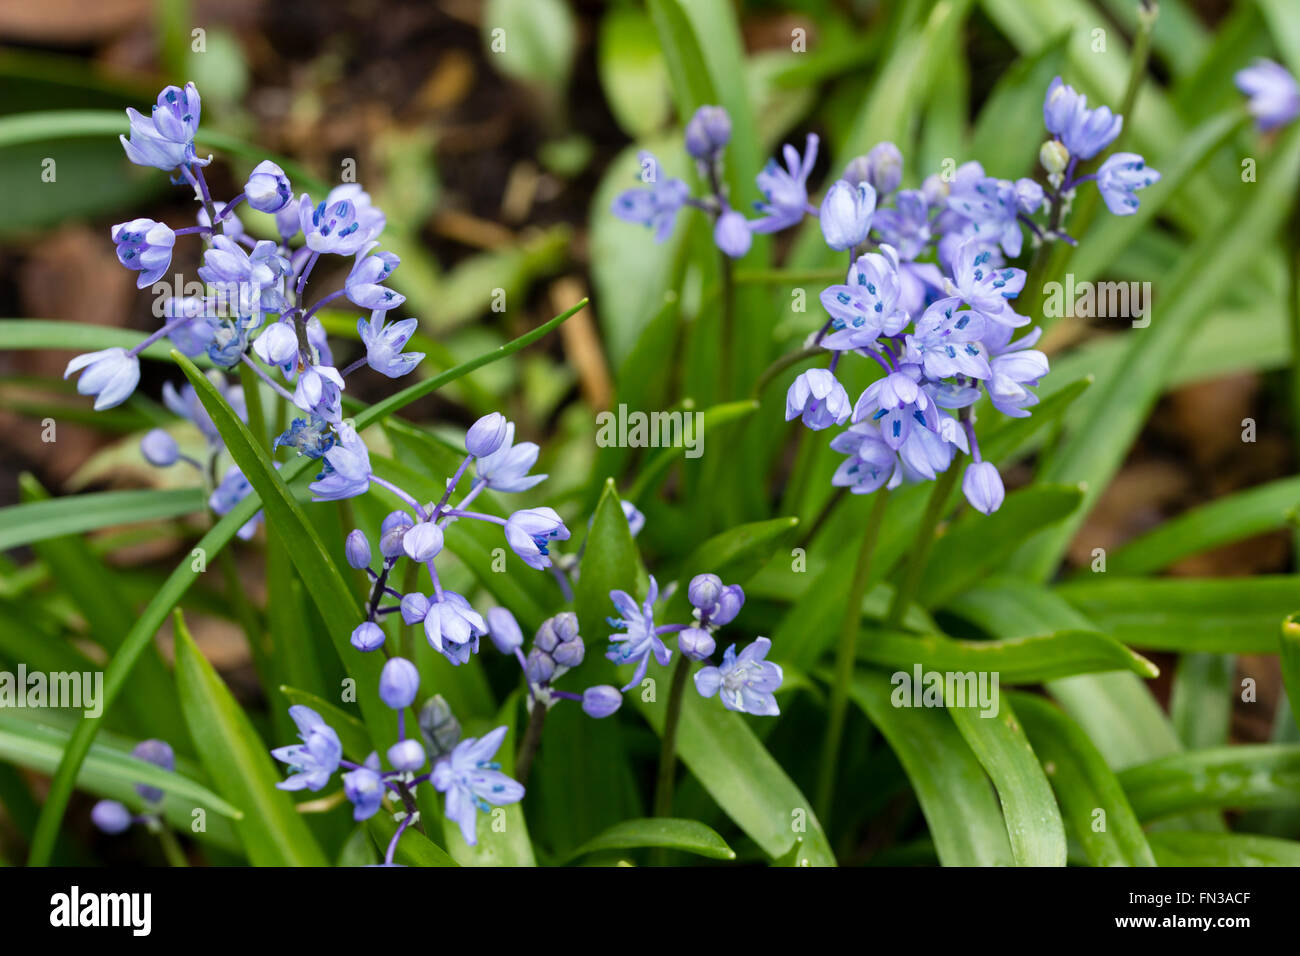 Early Spring flowers of the Turkish Squill bulb, Scilla bithynica, from coastal areas of the Black Sea Stock Photo